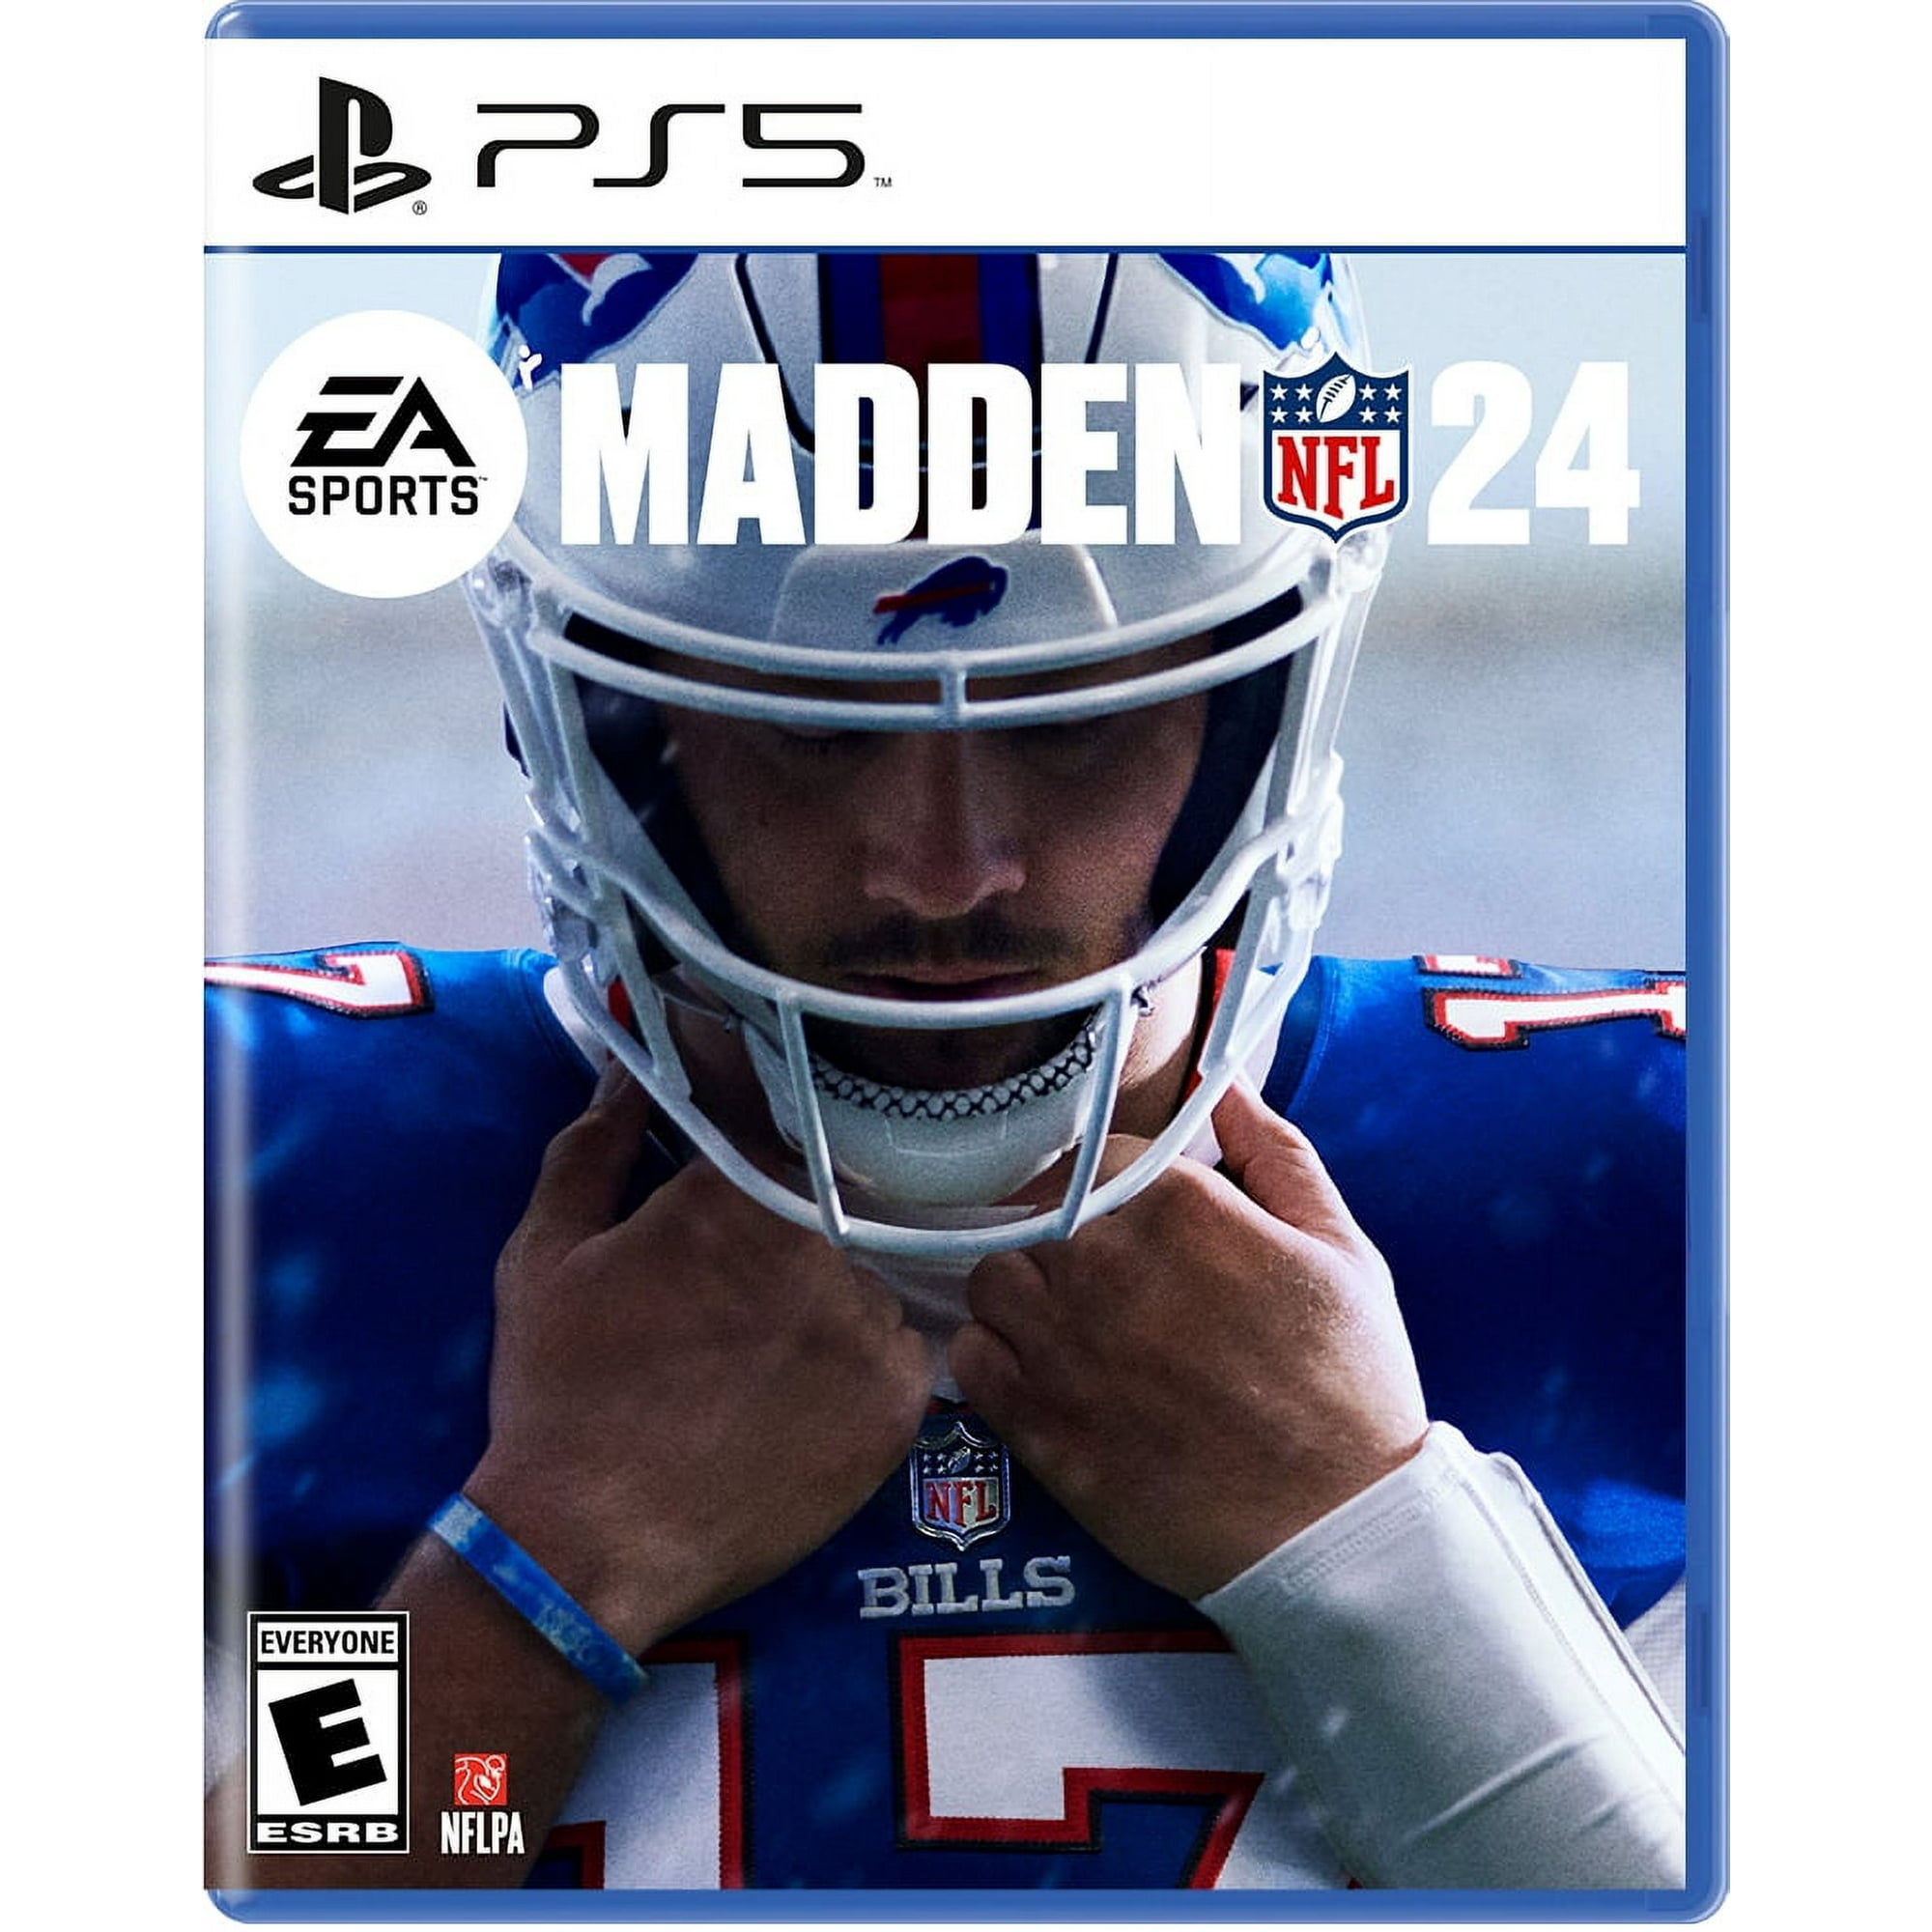 madden 22 ps4 download